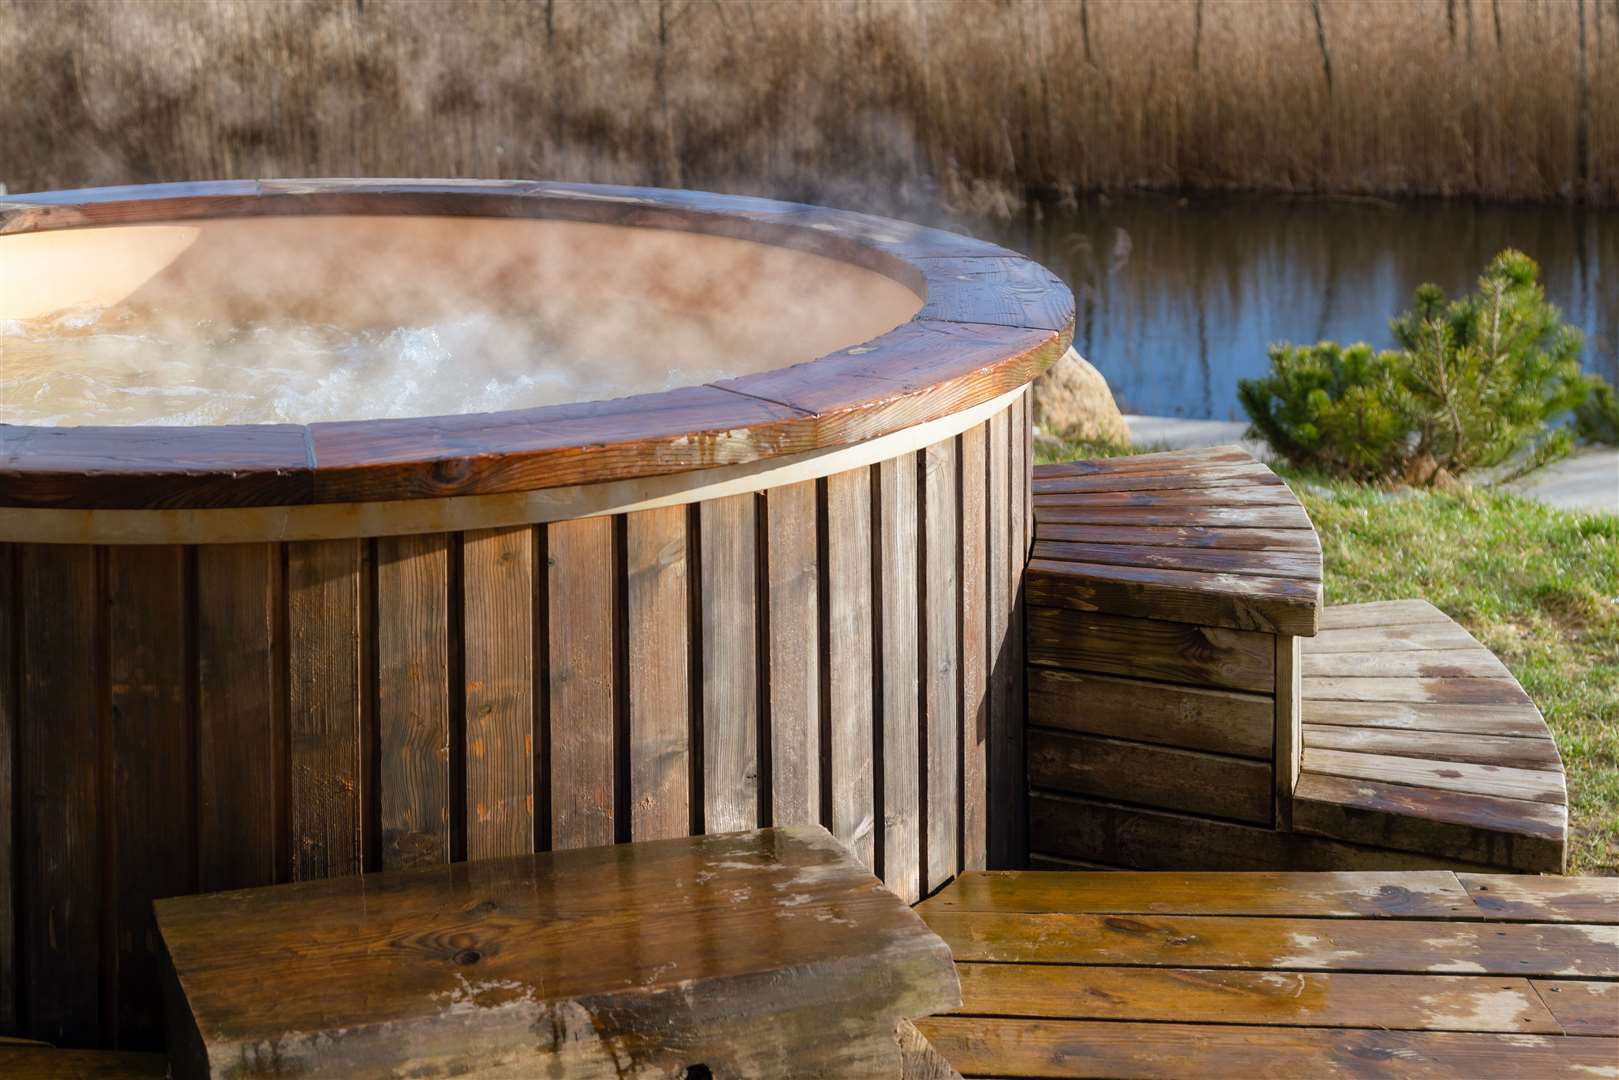 Short-term let owners must take reasonable steps to ensure that guests do not use the hot tub after 10pm.